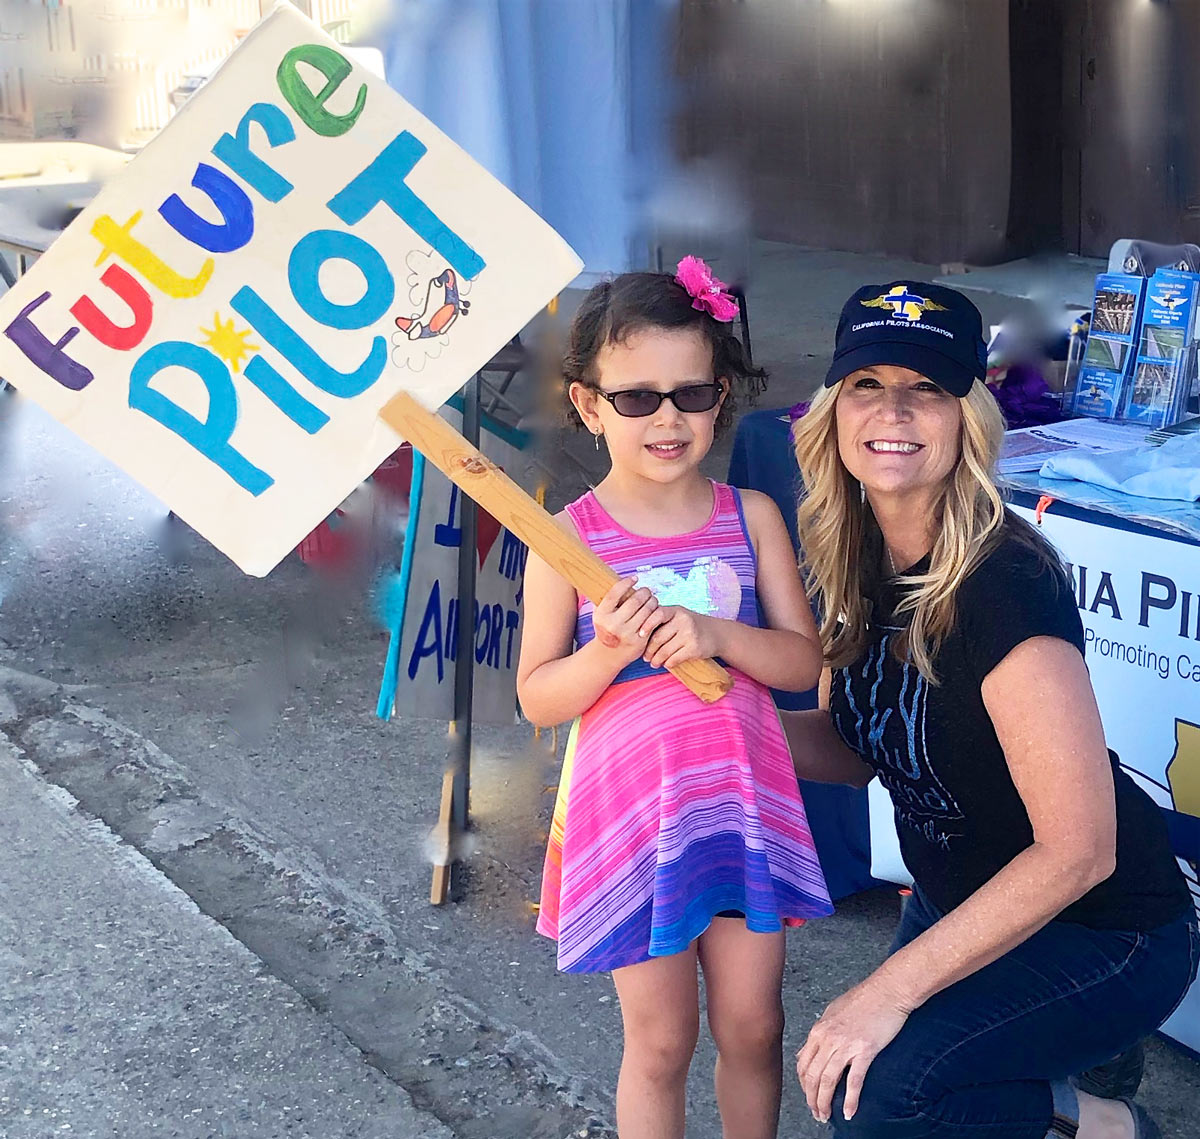 Future pilot girl with sign